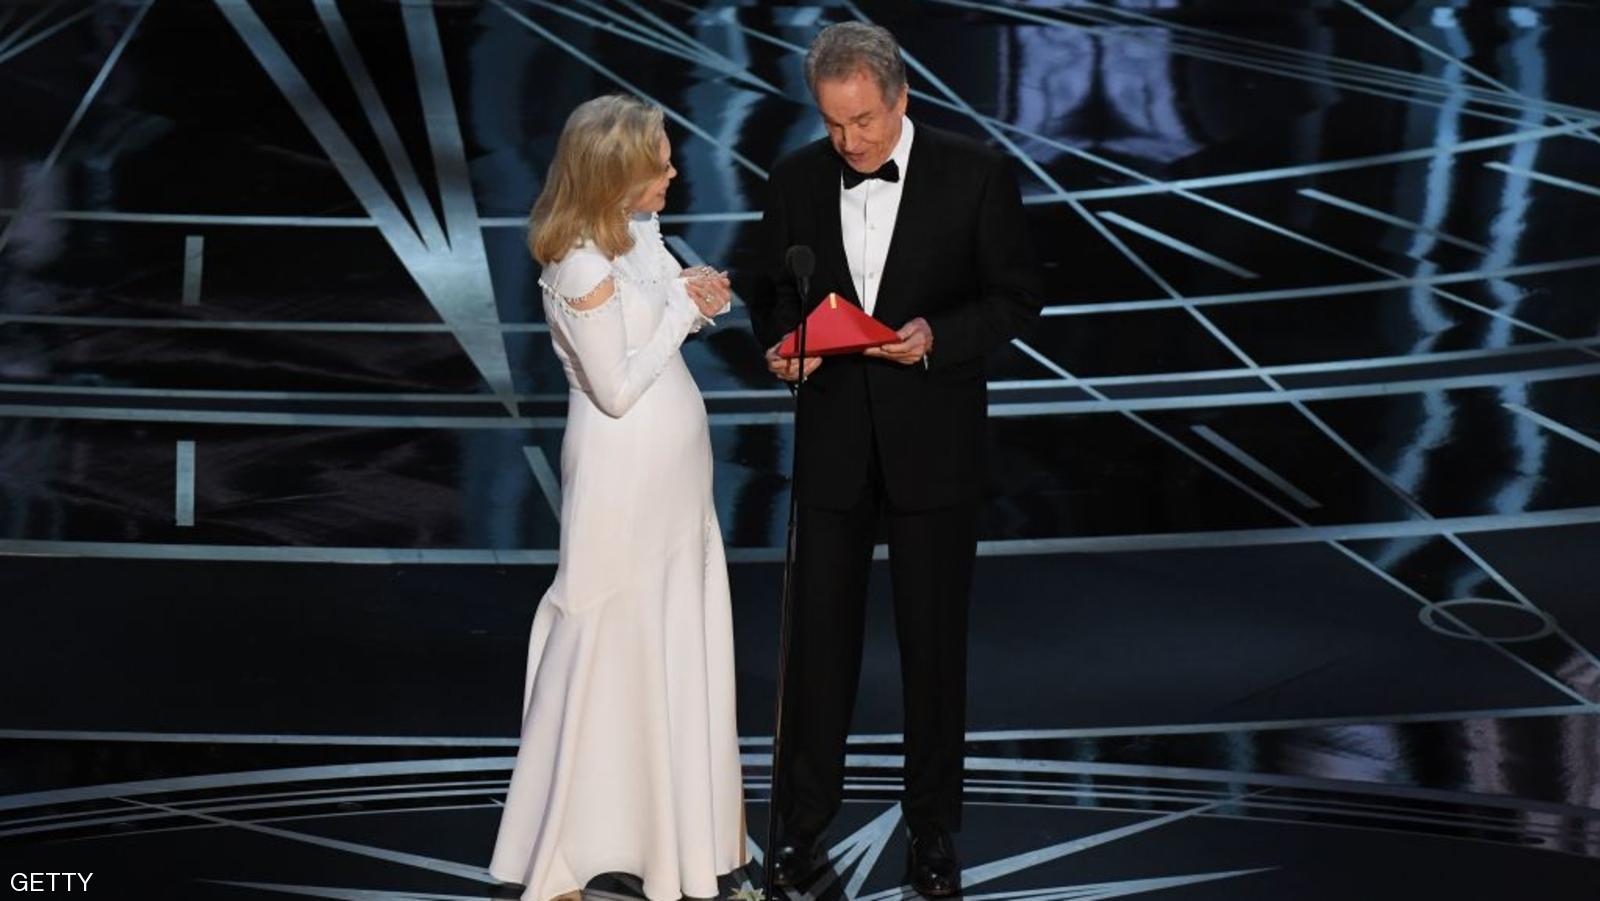 Actress Faye Dunaway and actor Warren Beatty arrive on stage to announce the winner of the Best Movie category at the 89th Oscars on February 26, 2017 in Hollywood, California. / AFP / Mark RALSTON (Photo credit should read MARK RALSTON/AFP/Getty Images)